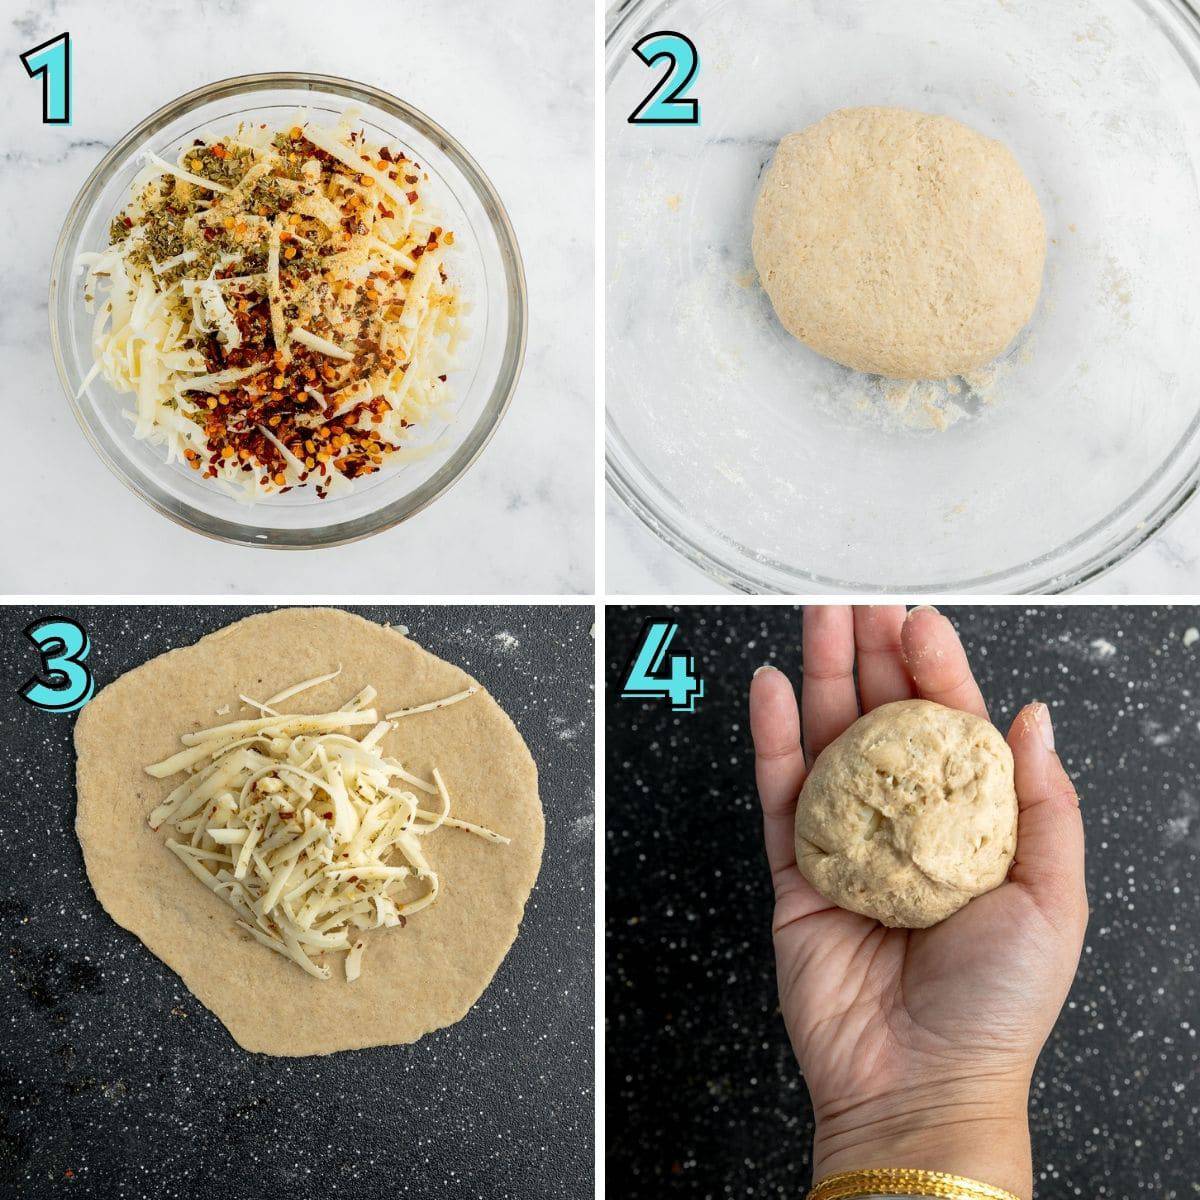 Step by step instructions to prepare cheese paratha. 